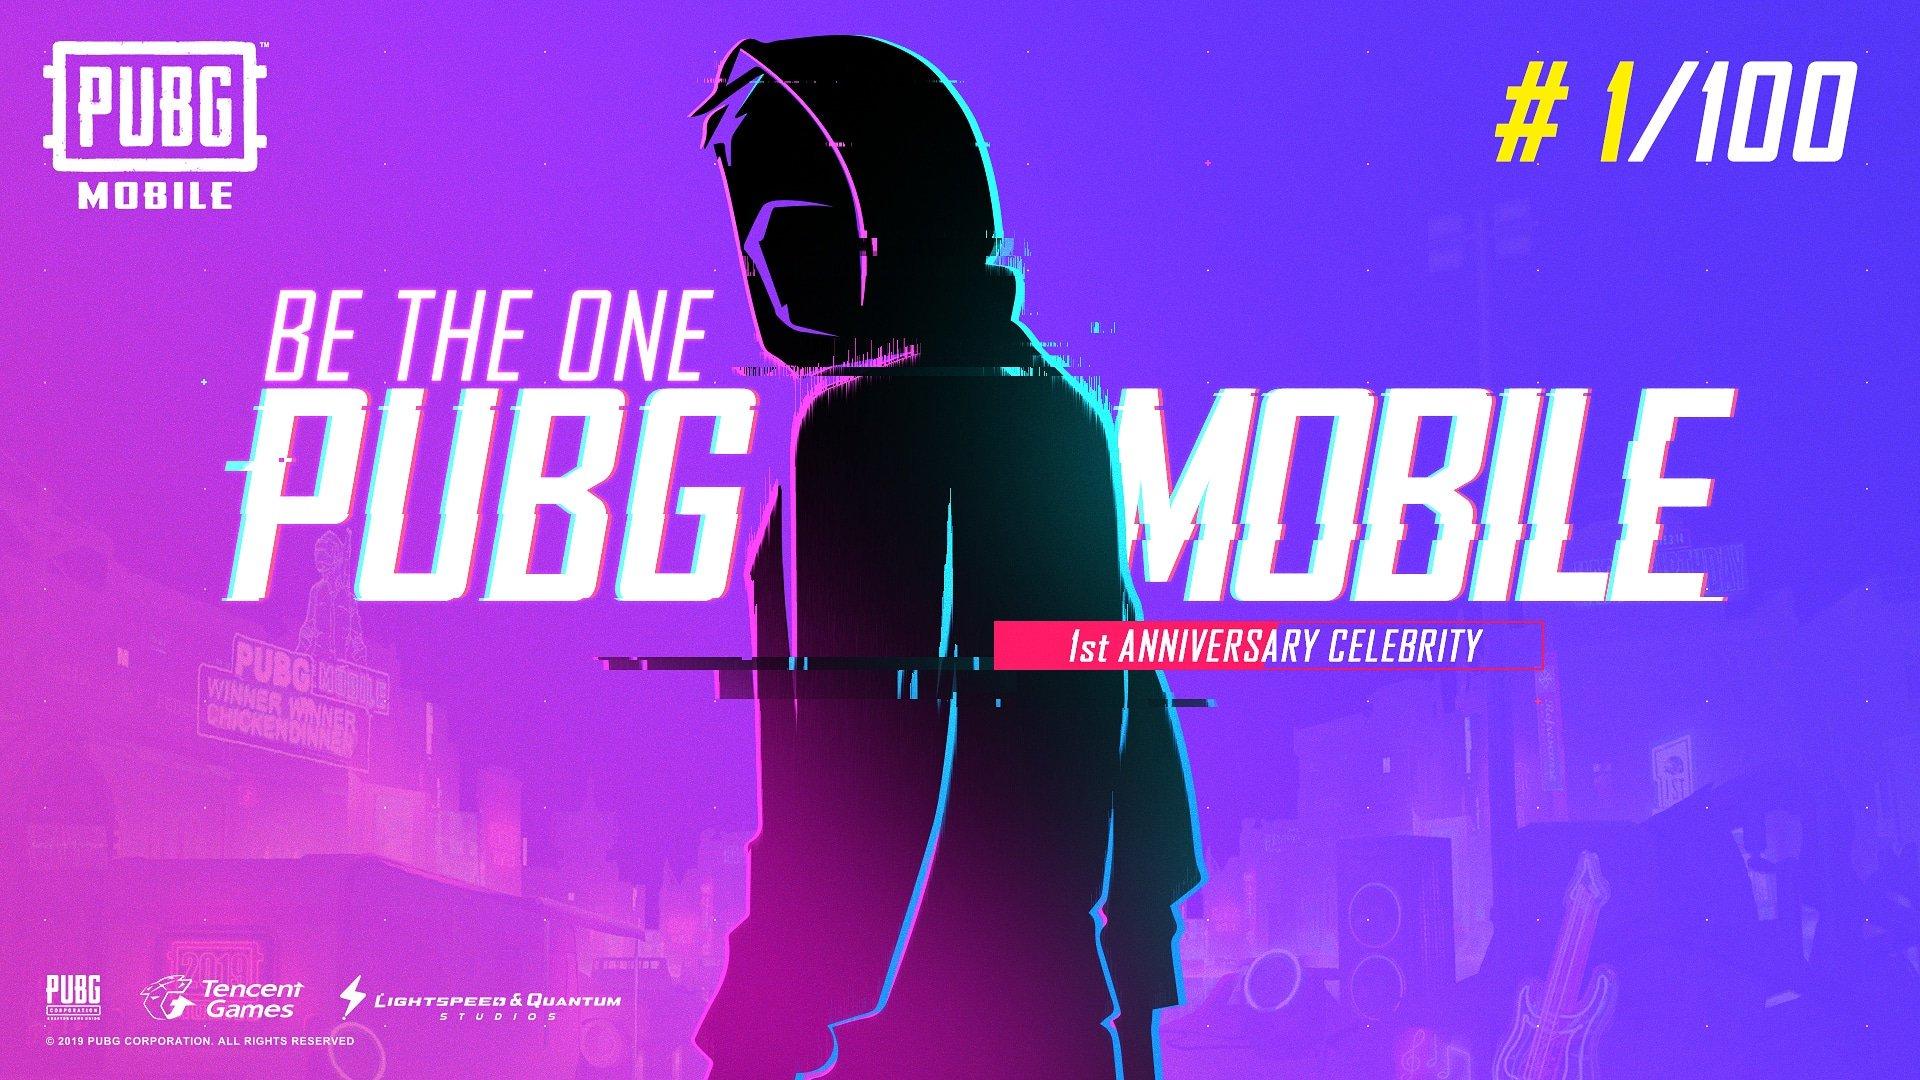 PUBG MOBILE secret guest has been invited to join our